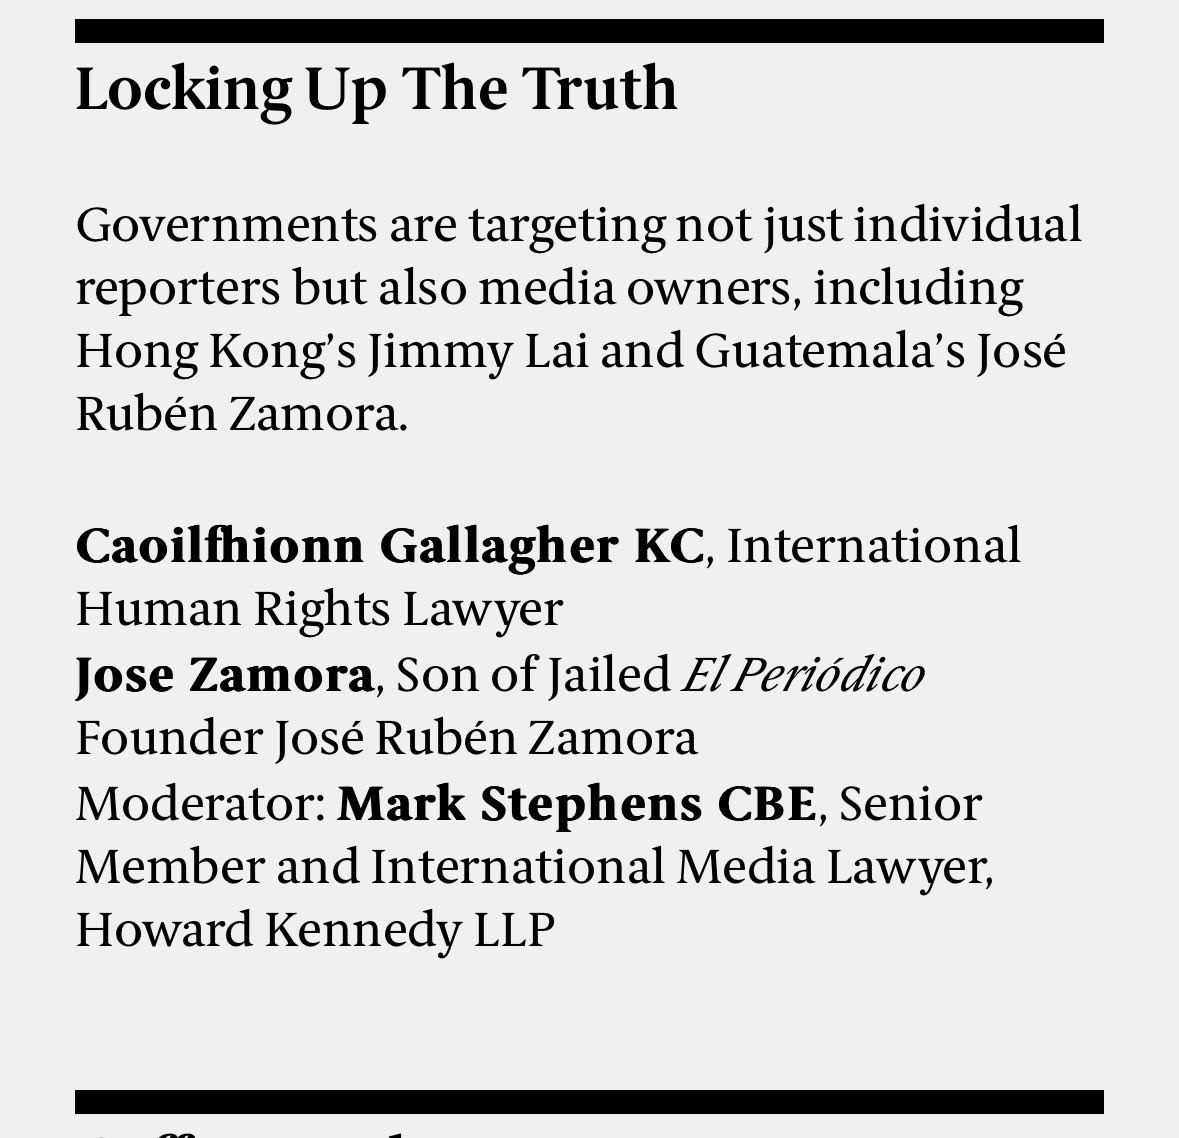 Tomorrow I will be at #TruthTellers @sirharrysummit, discussing why governments no longer just target individual reporters, but now take aim at media owners. We’ll discuss two brave, brilliant men: #JimmyLai in #HongKong & #JoséRubénZamora in #Guatemala. @MarksLarks @jczamora